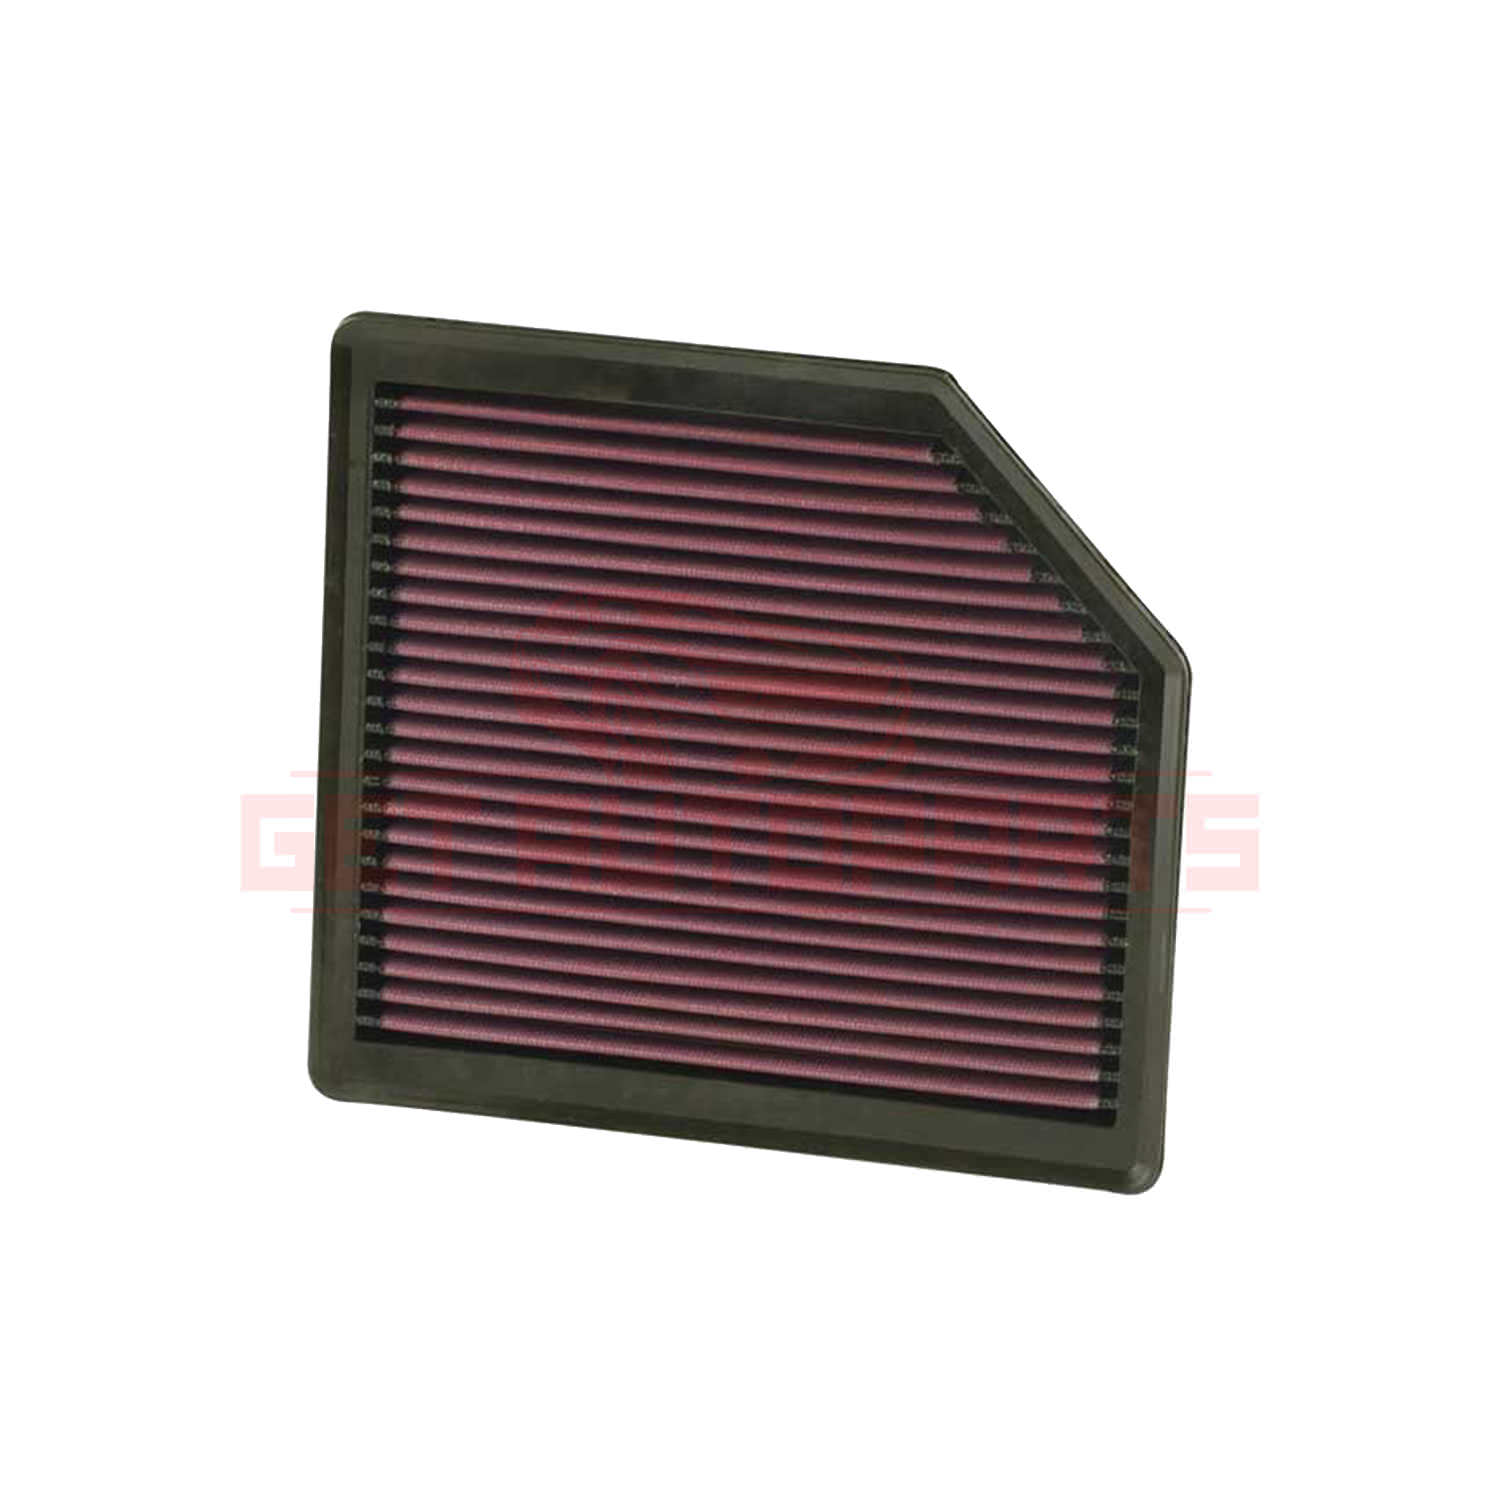 K&N Replacement Air Filter for Ford Mustang 2007-2009